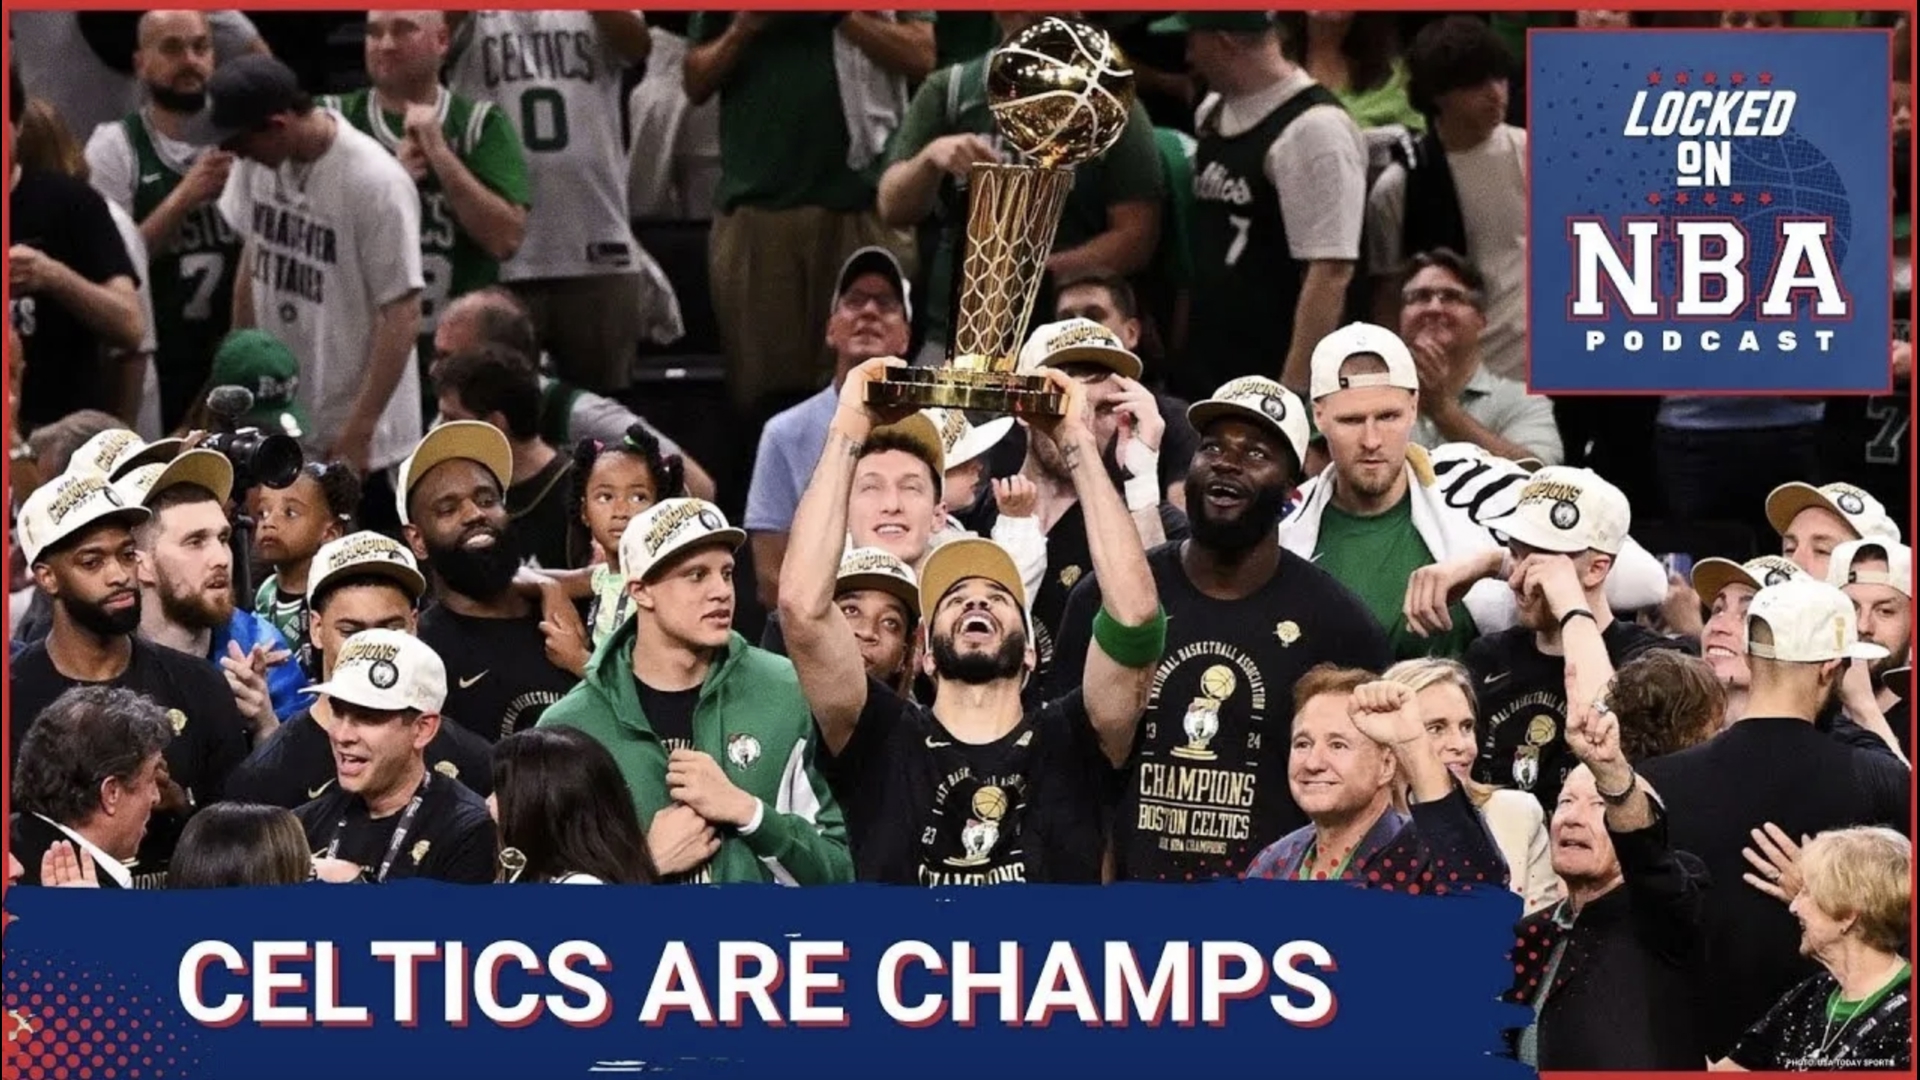 Matt Moore and Tony East break down the Celtics' 2024 title victory over the Mavericks. Jaylen Brown wins Finals MVP but one of our hosts disagrees.